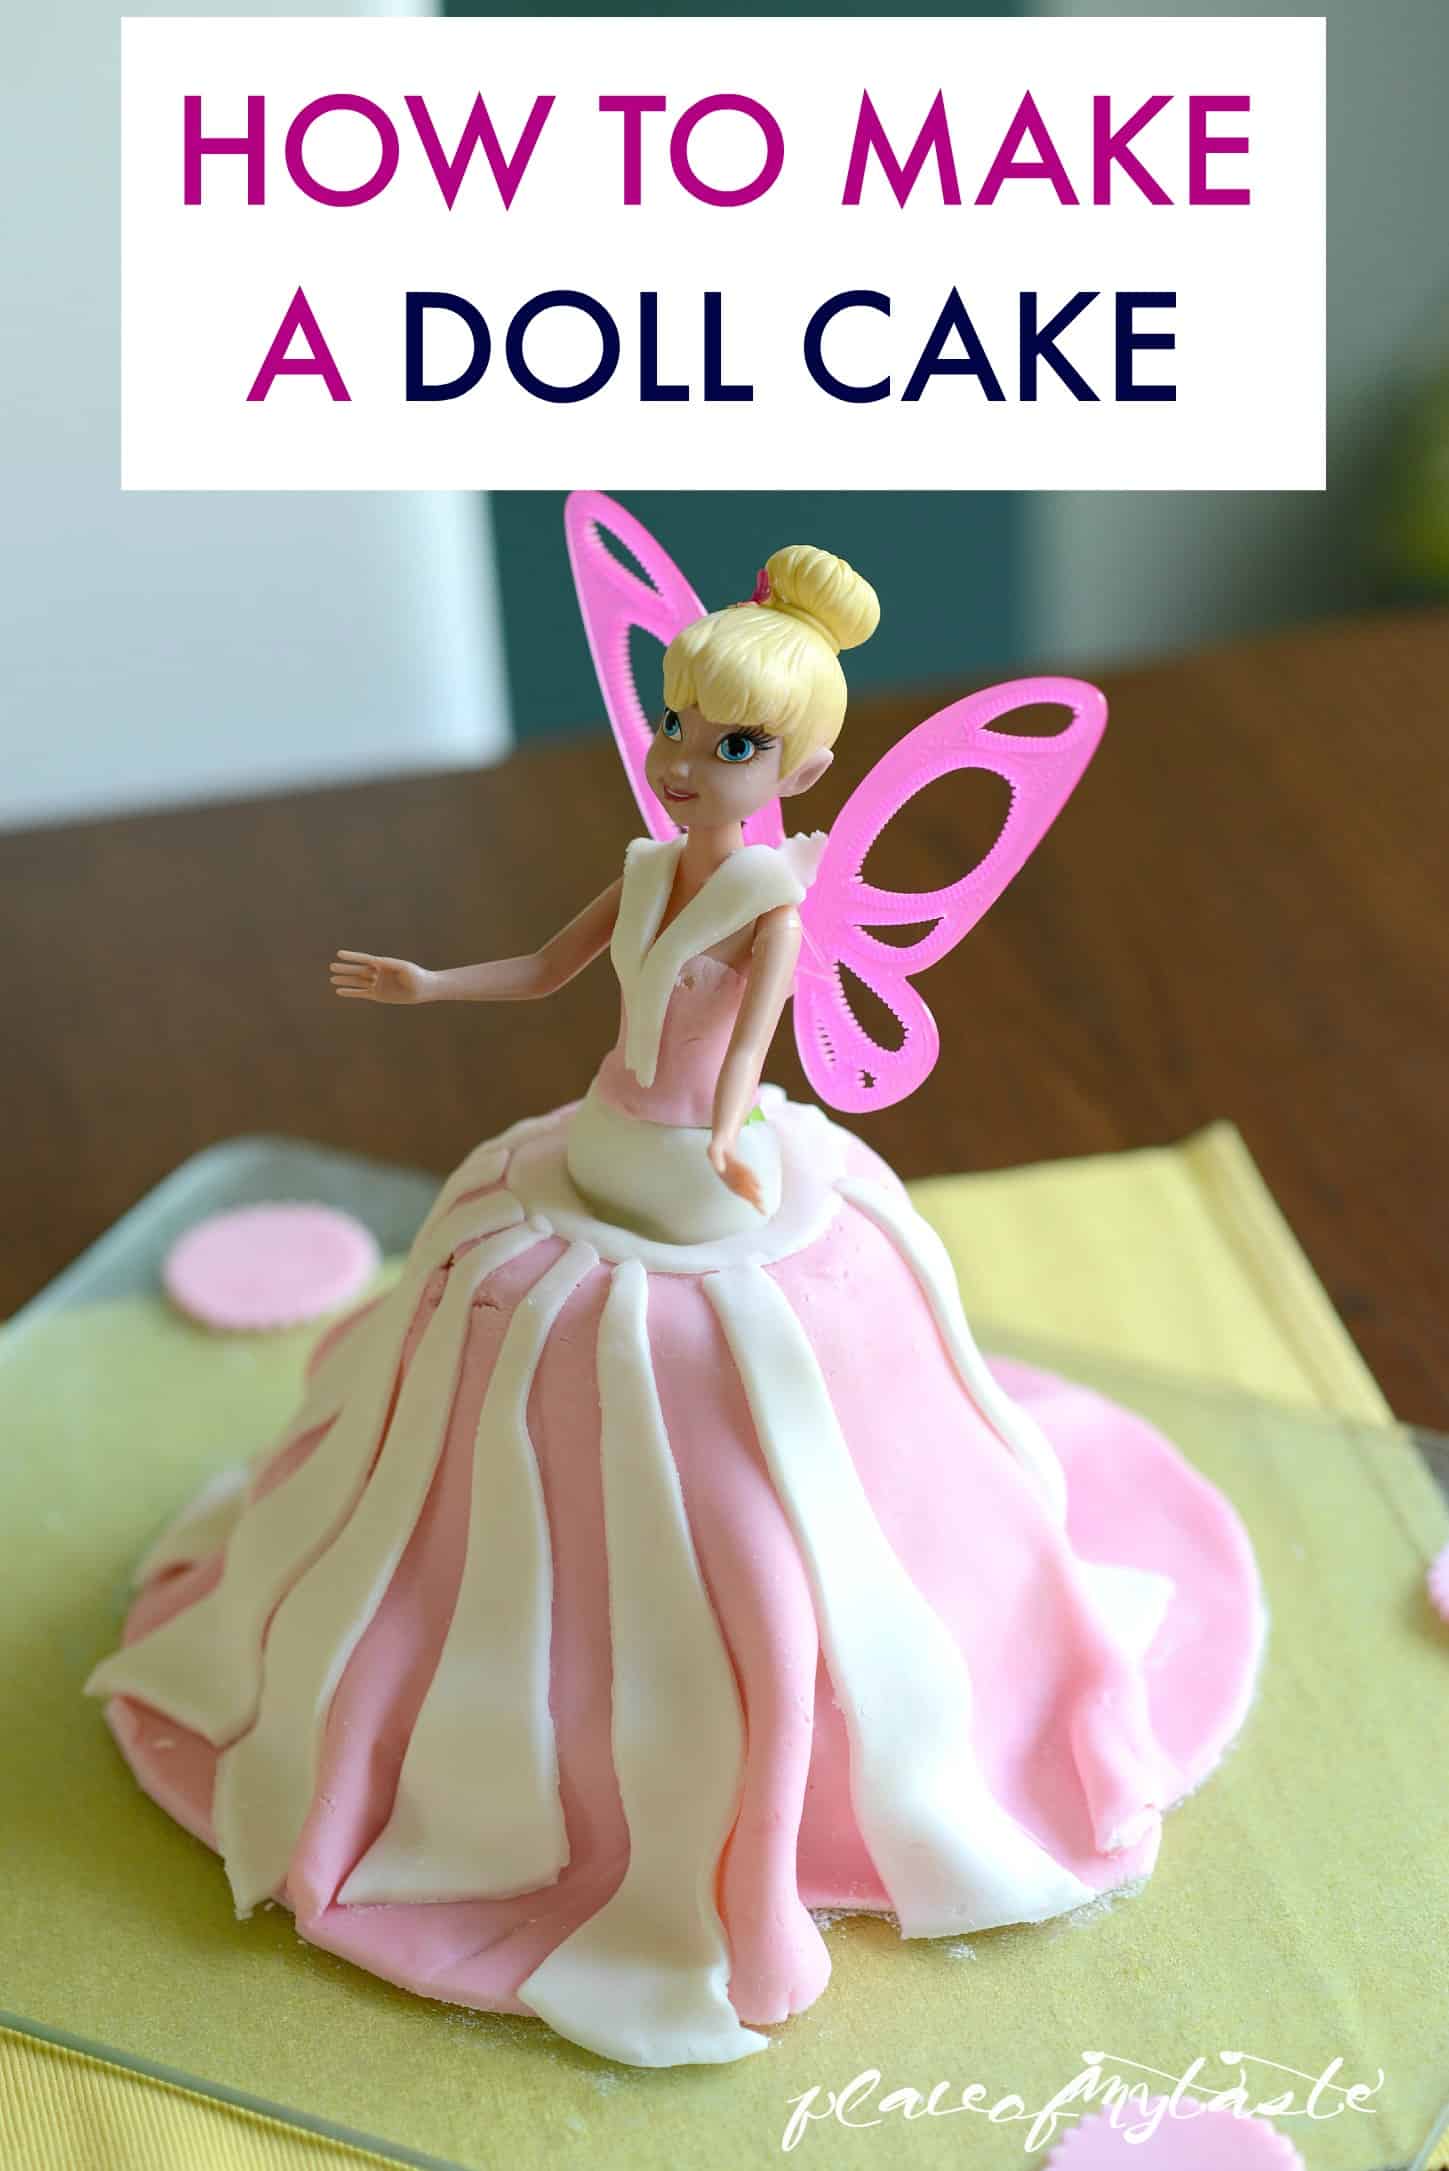 Doll cake with a fondant and sponge skirt